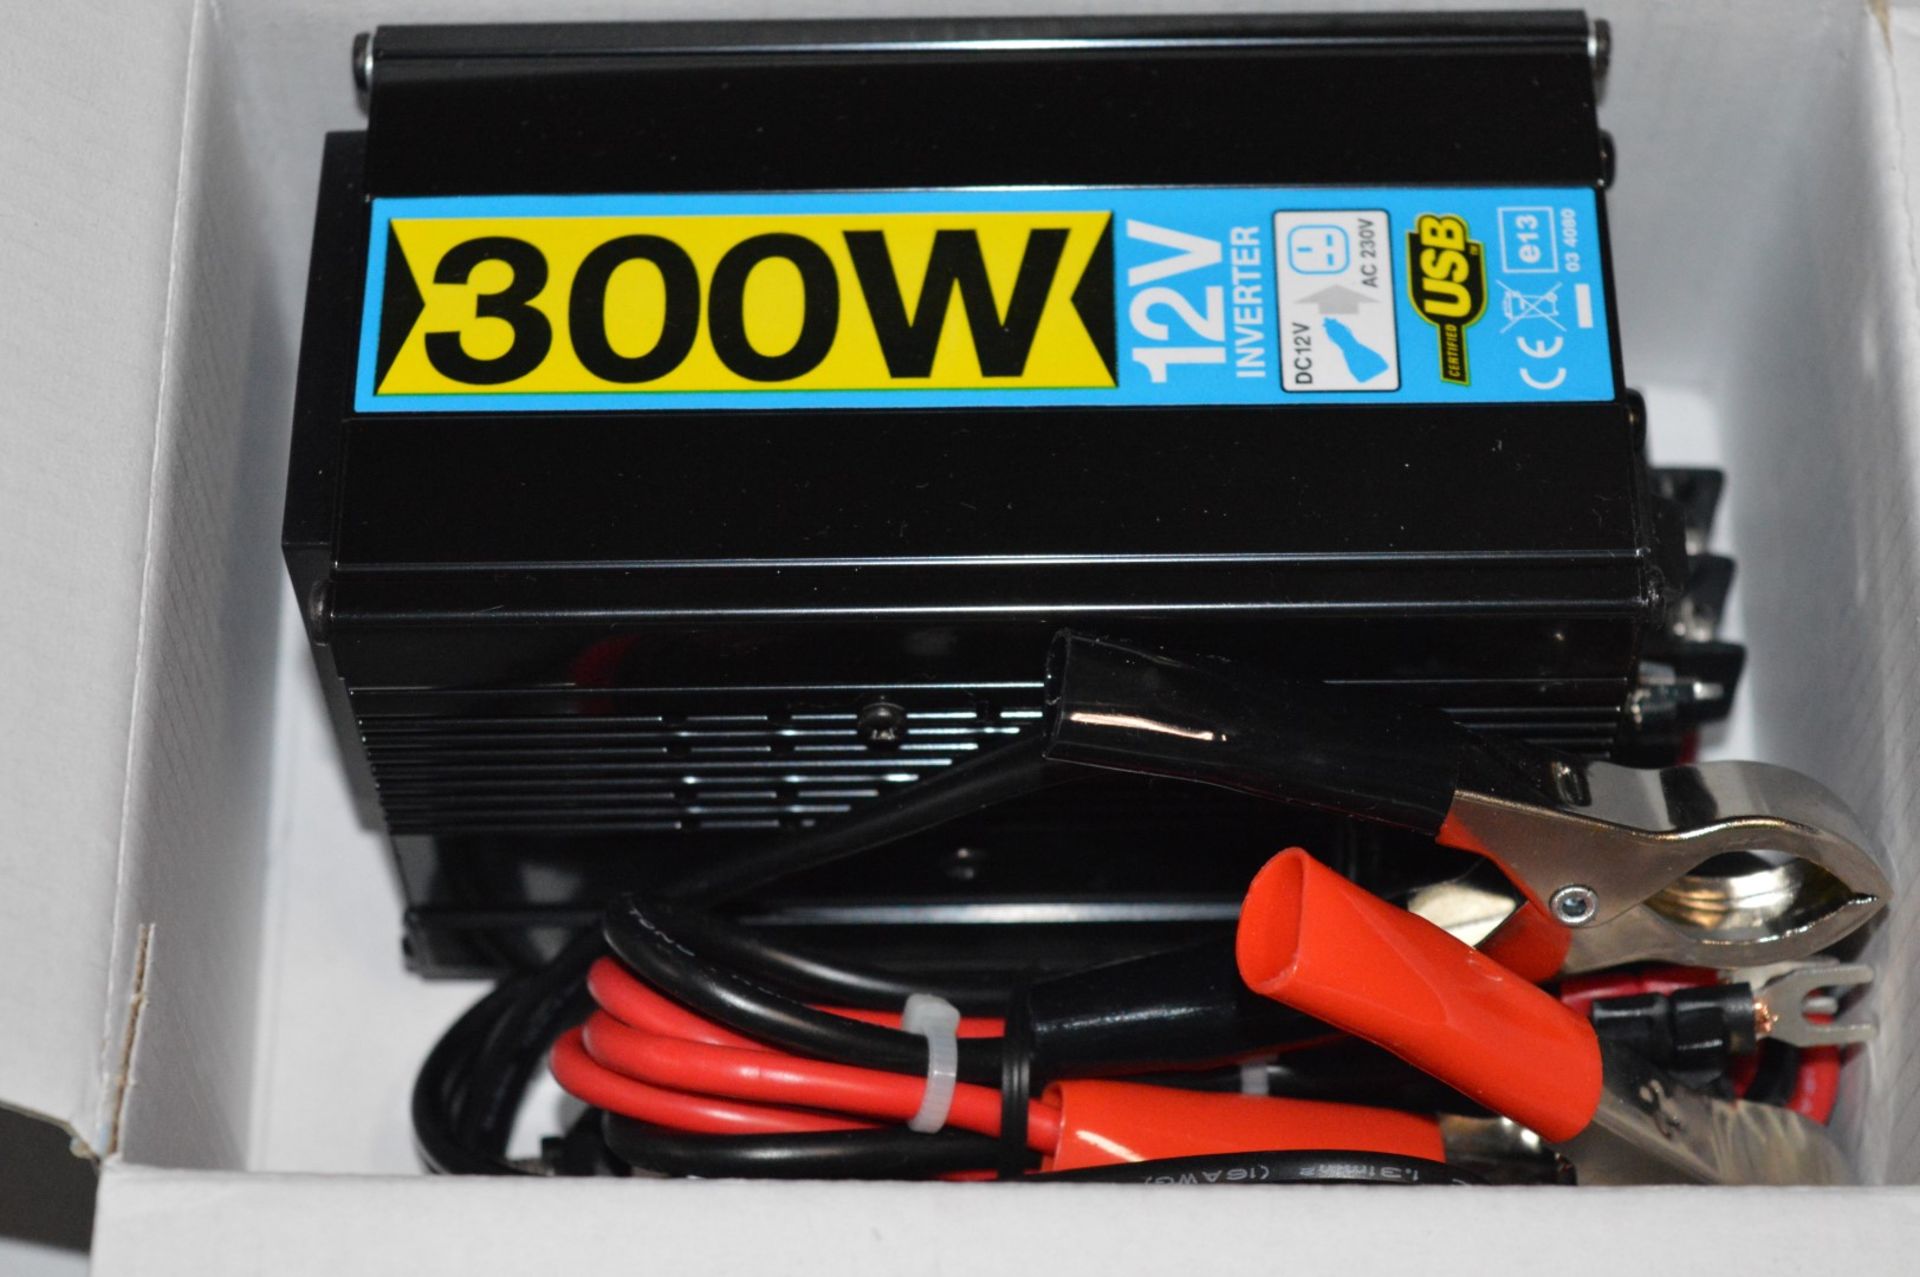 1 x Maplin 300w 12v Inverter - Boxed in Excellent Condition - Provides AC 239v From DC 12v - Image 3 of 3